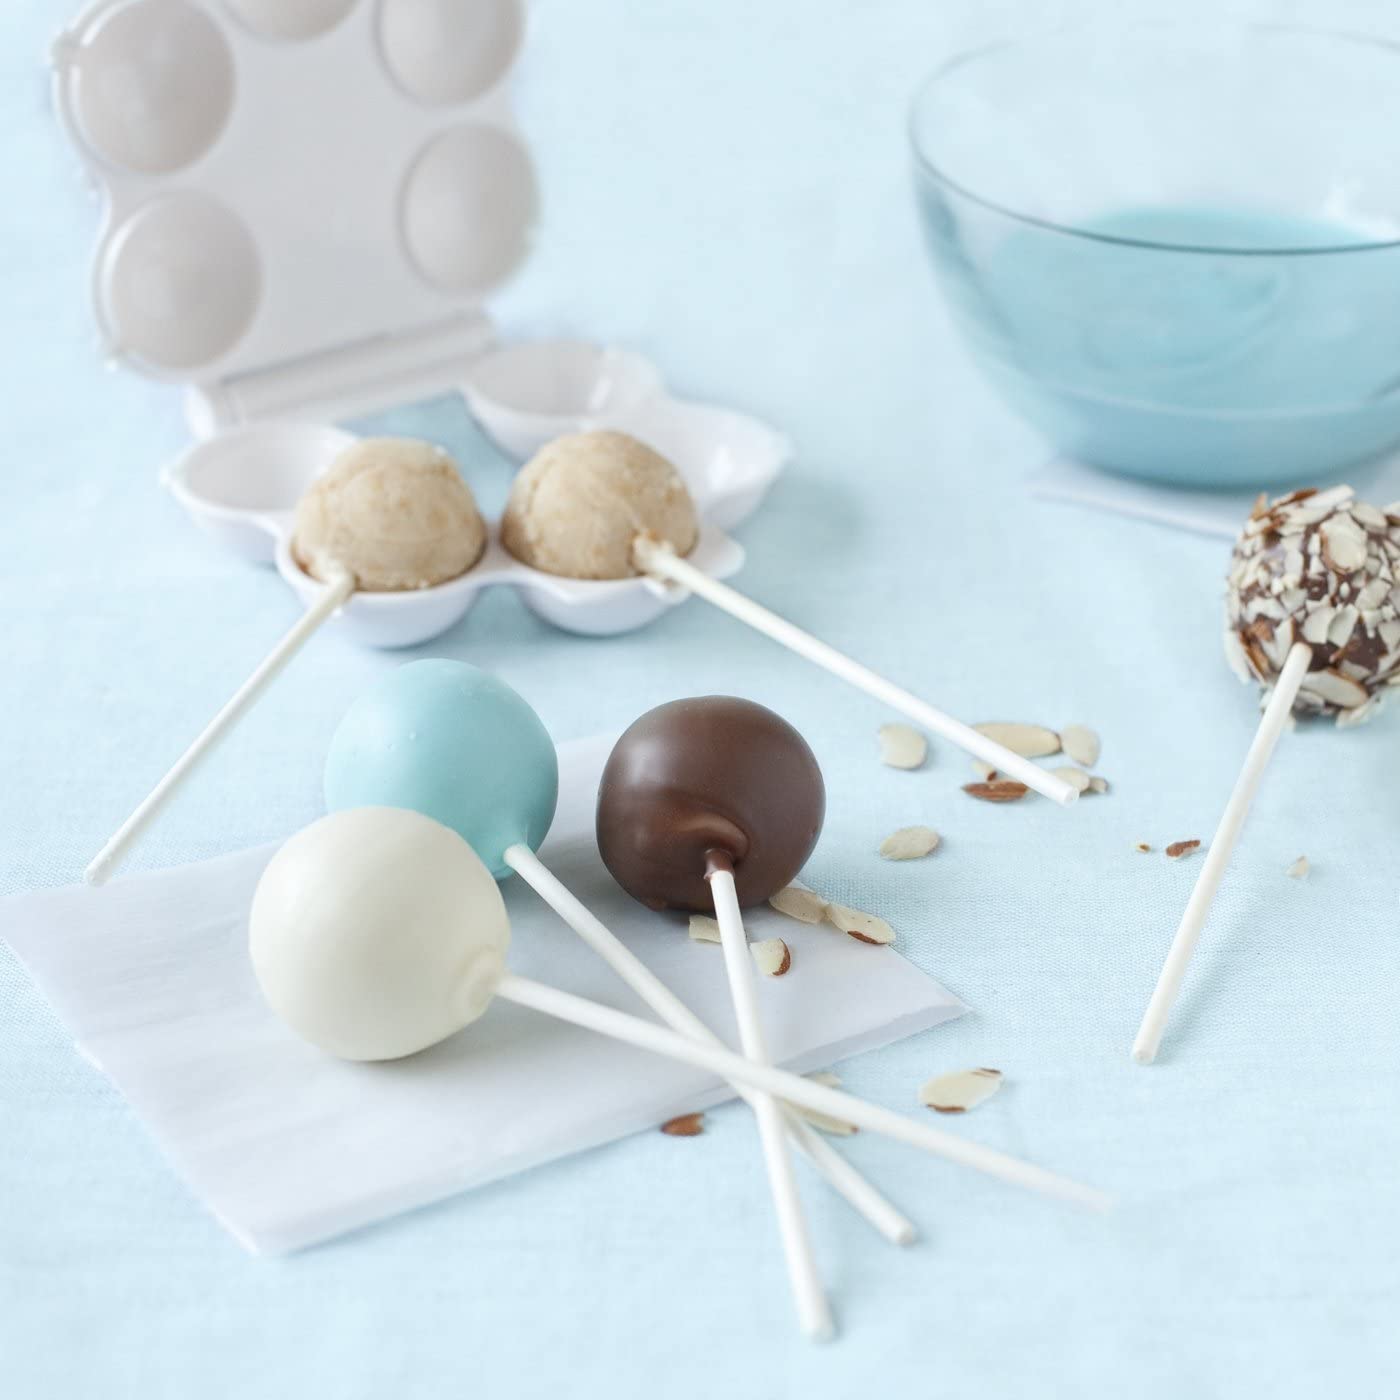 Cake Pop Mold Only $2.97!! - Become a Coupon Queen